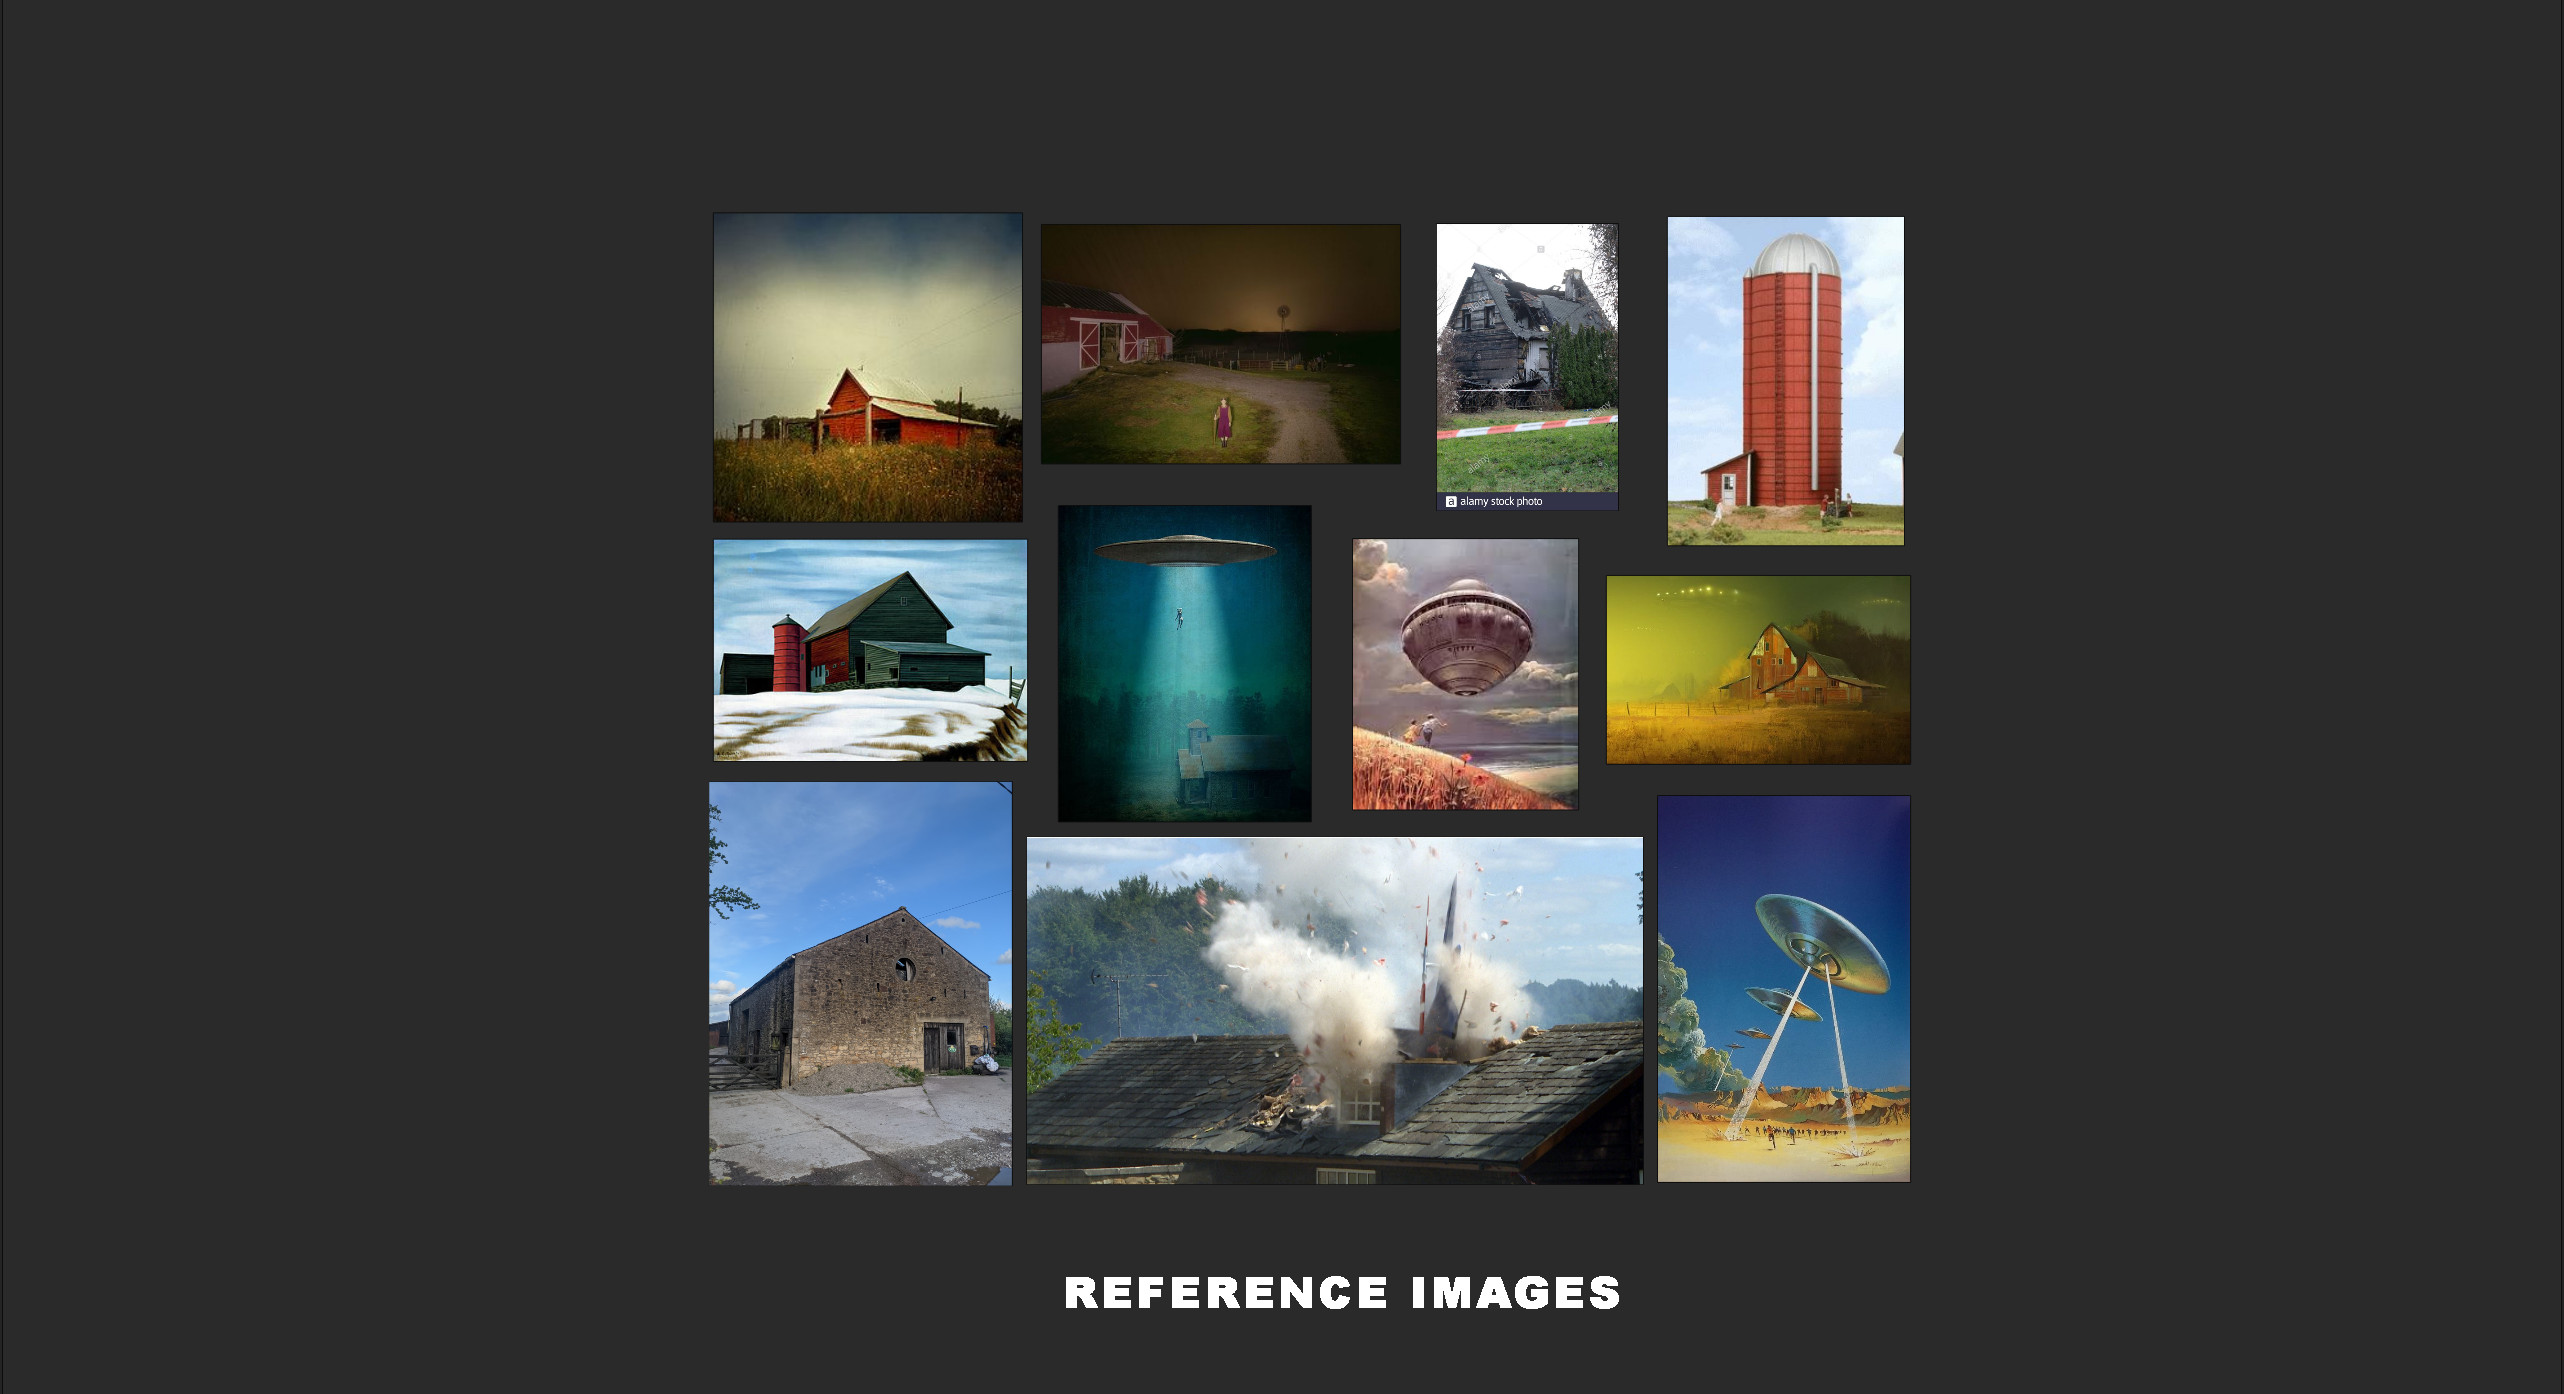 Reference images